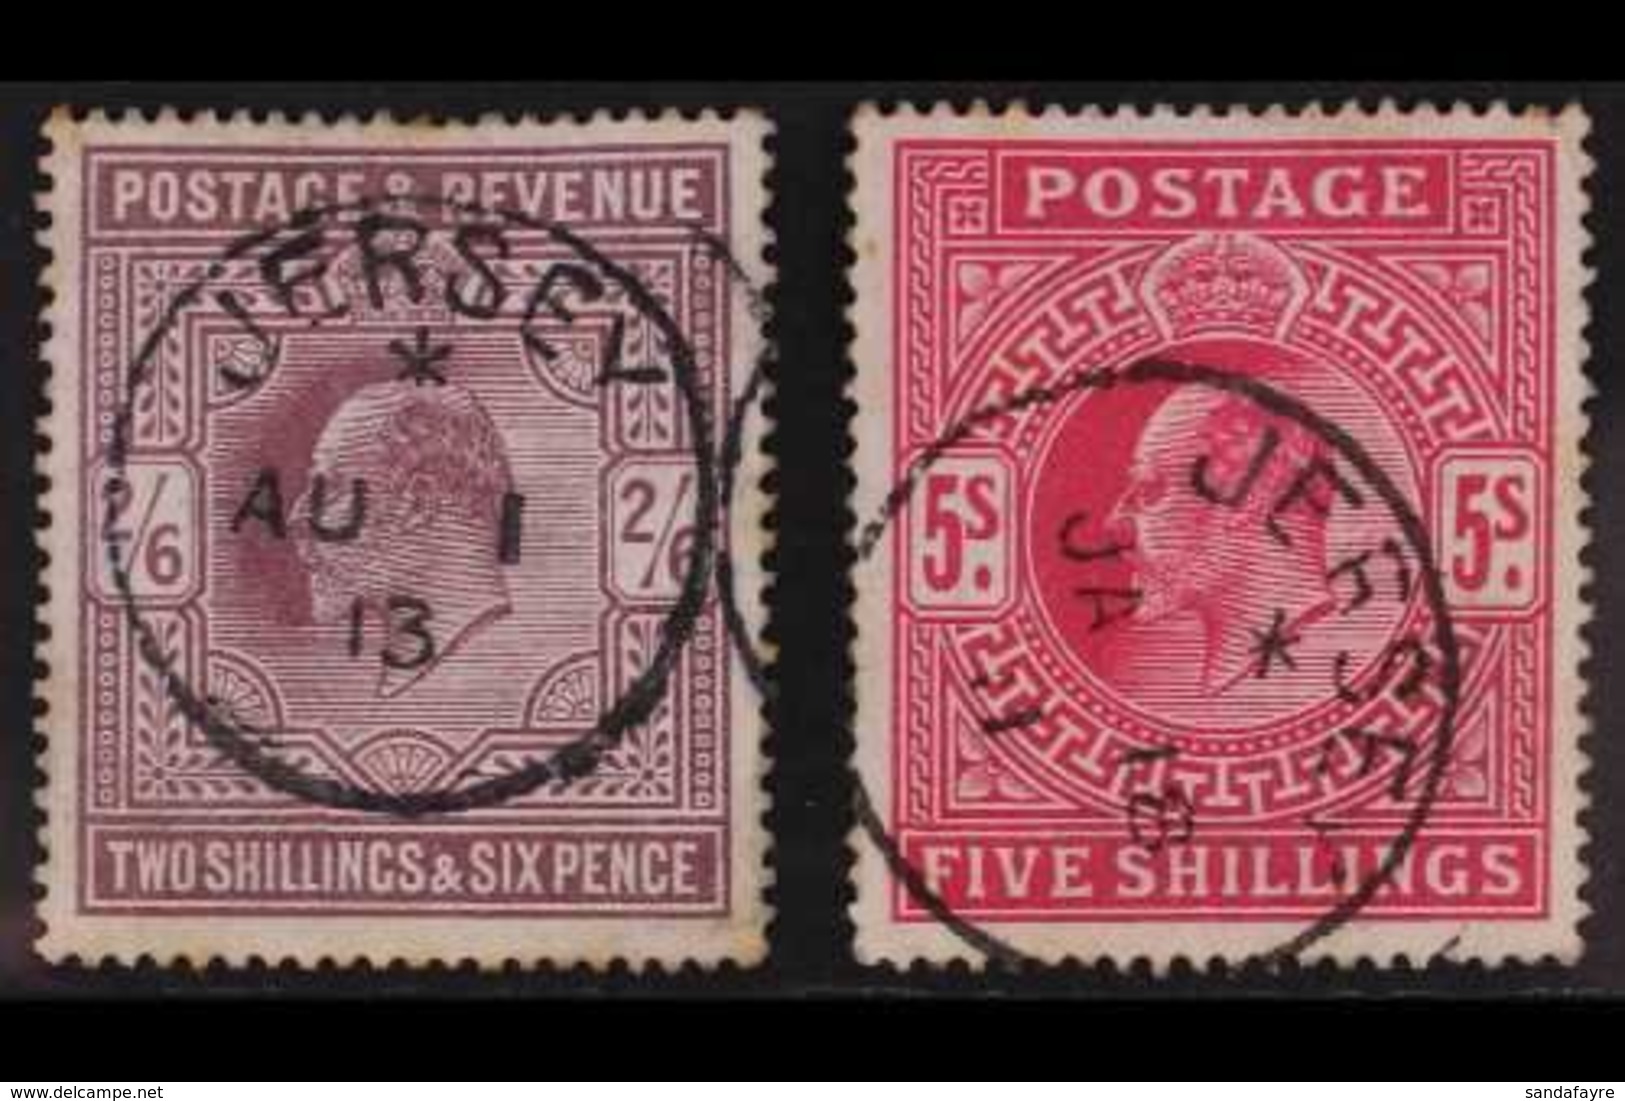 1911-13 2s6d & 5s Values (SG 316, 318) With Matching Jersey Cds's, Some Mild Tone Spots But A Striking Pairing, Cat £380 - Unclassified